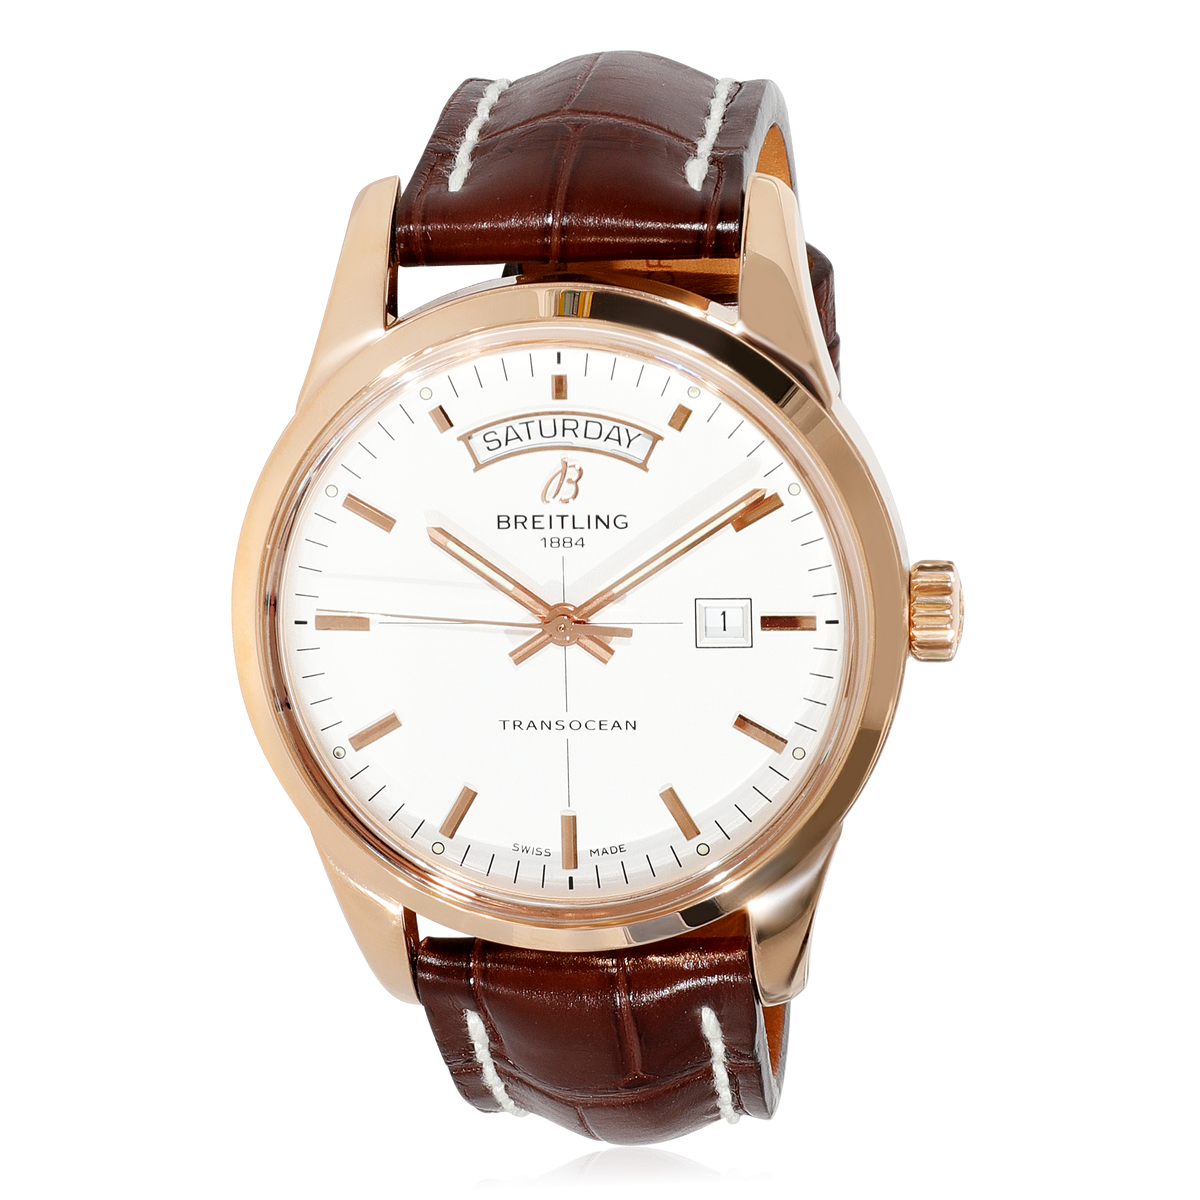 Breitling Transocean Day-Date R4531012/G752 Men's Watch in 18kt Rose Gold